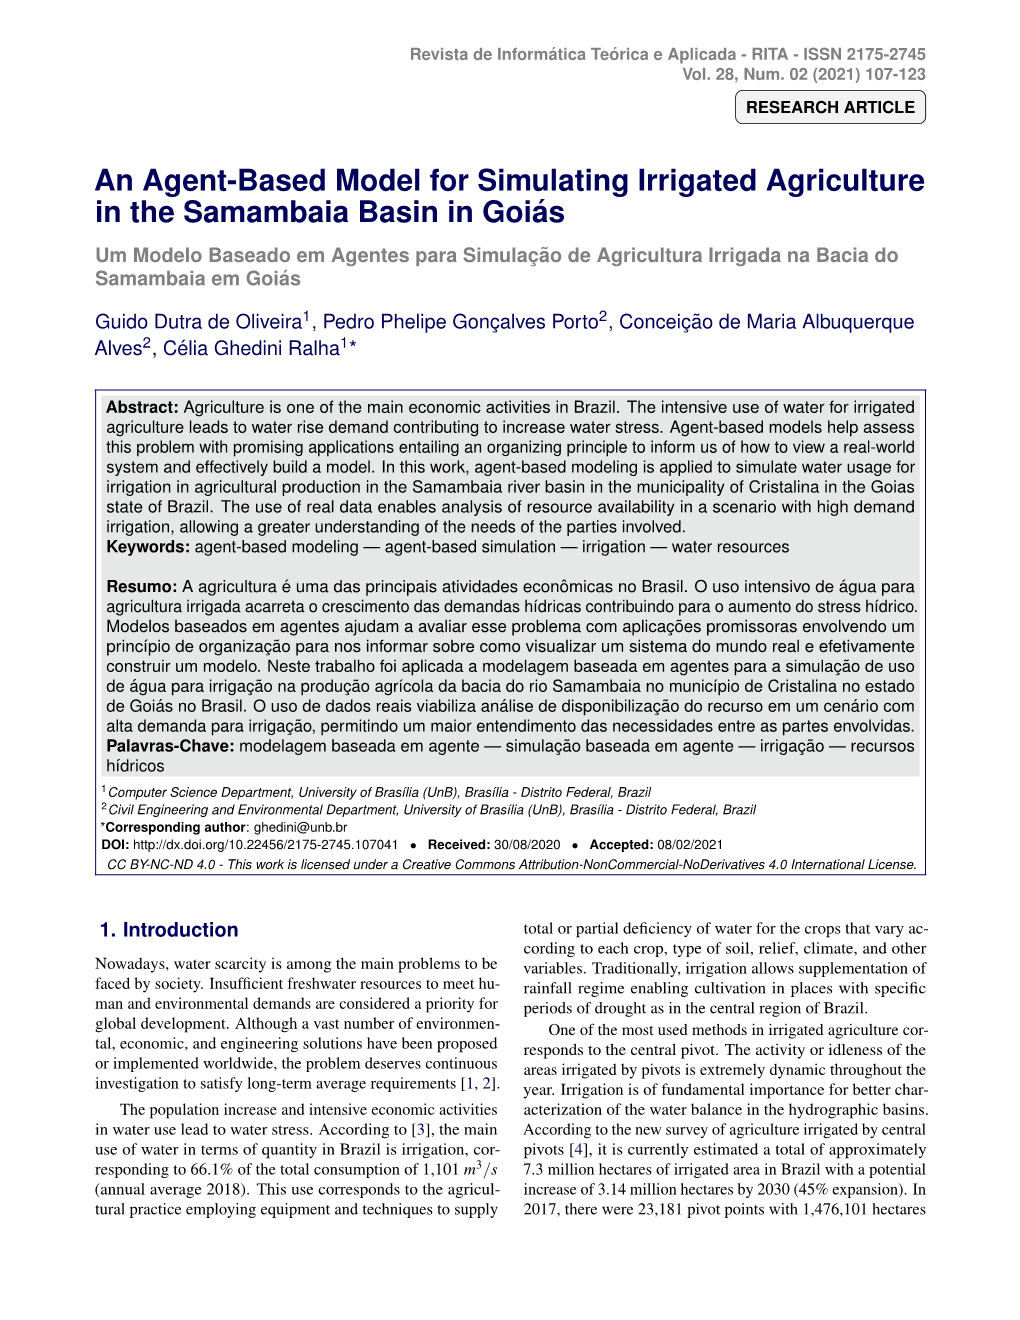 An Agent-Based Model for Simulating Irrigated Agriculture In